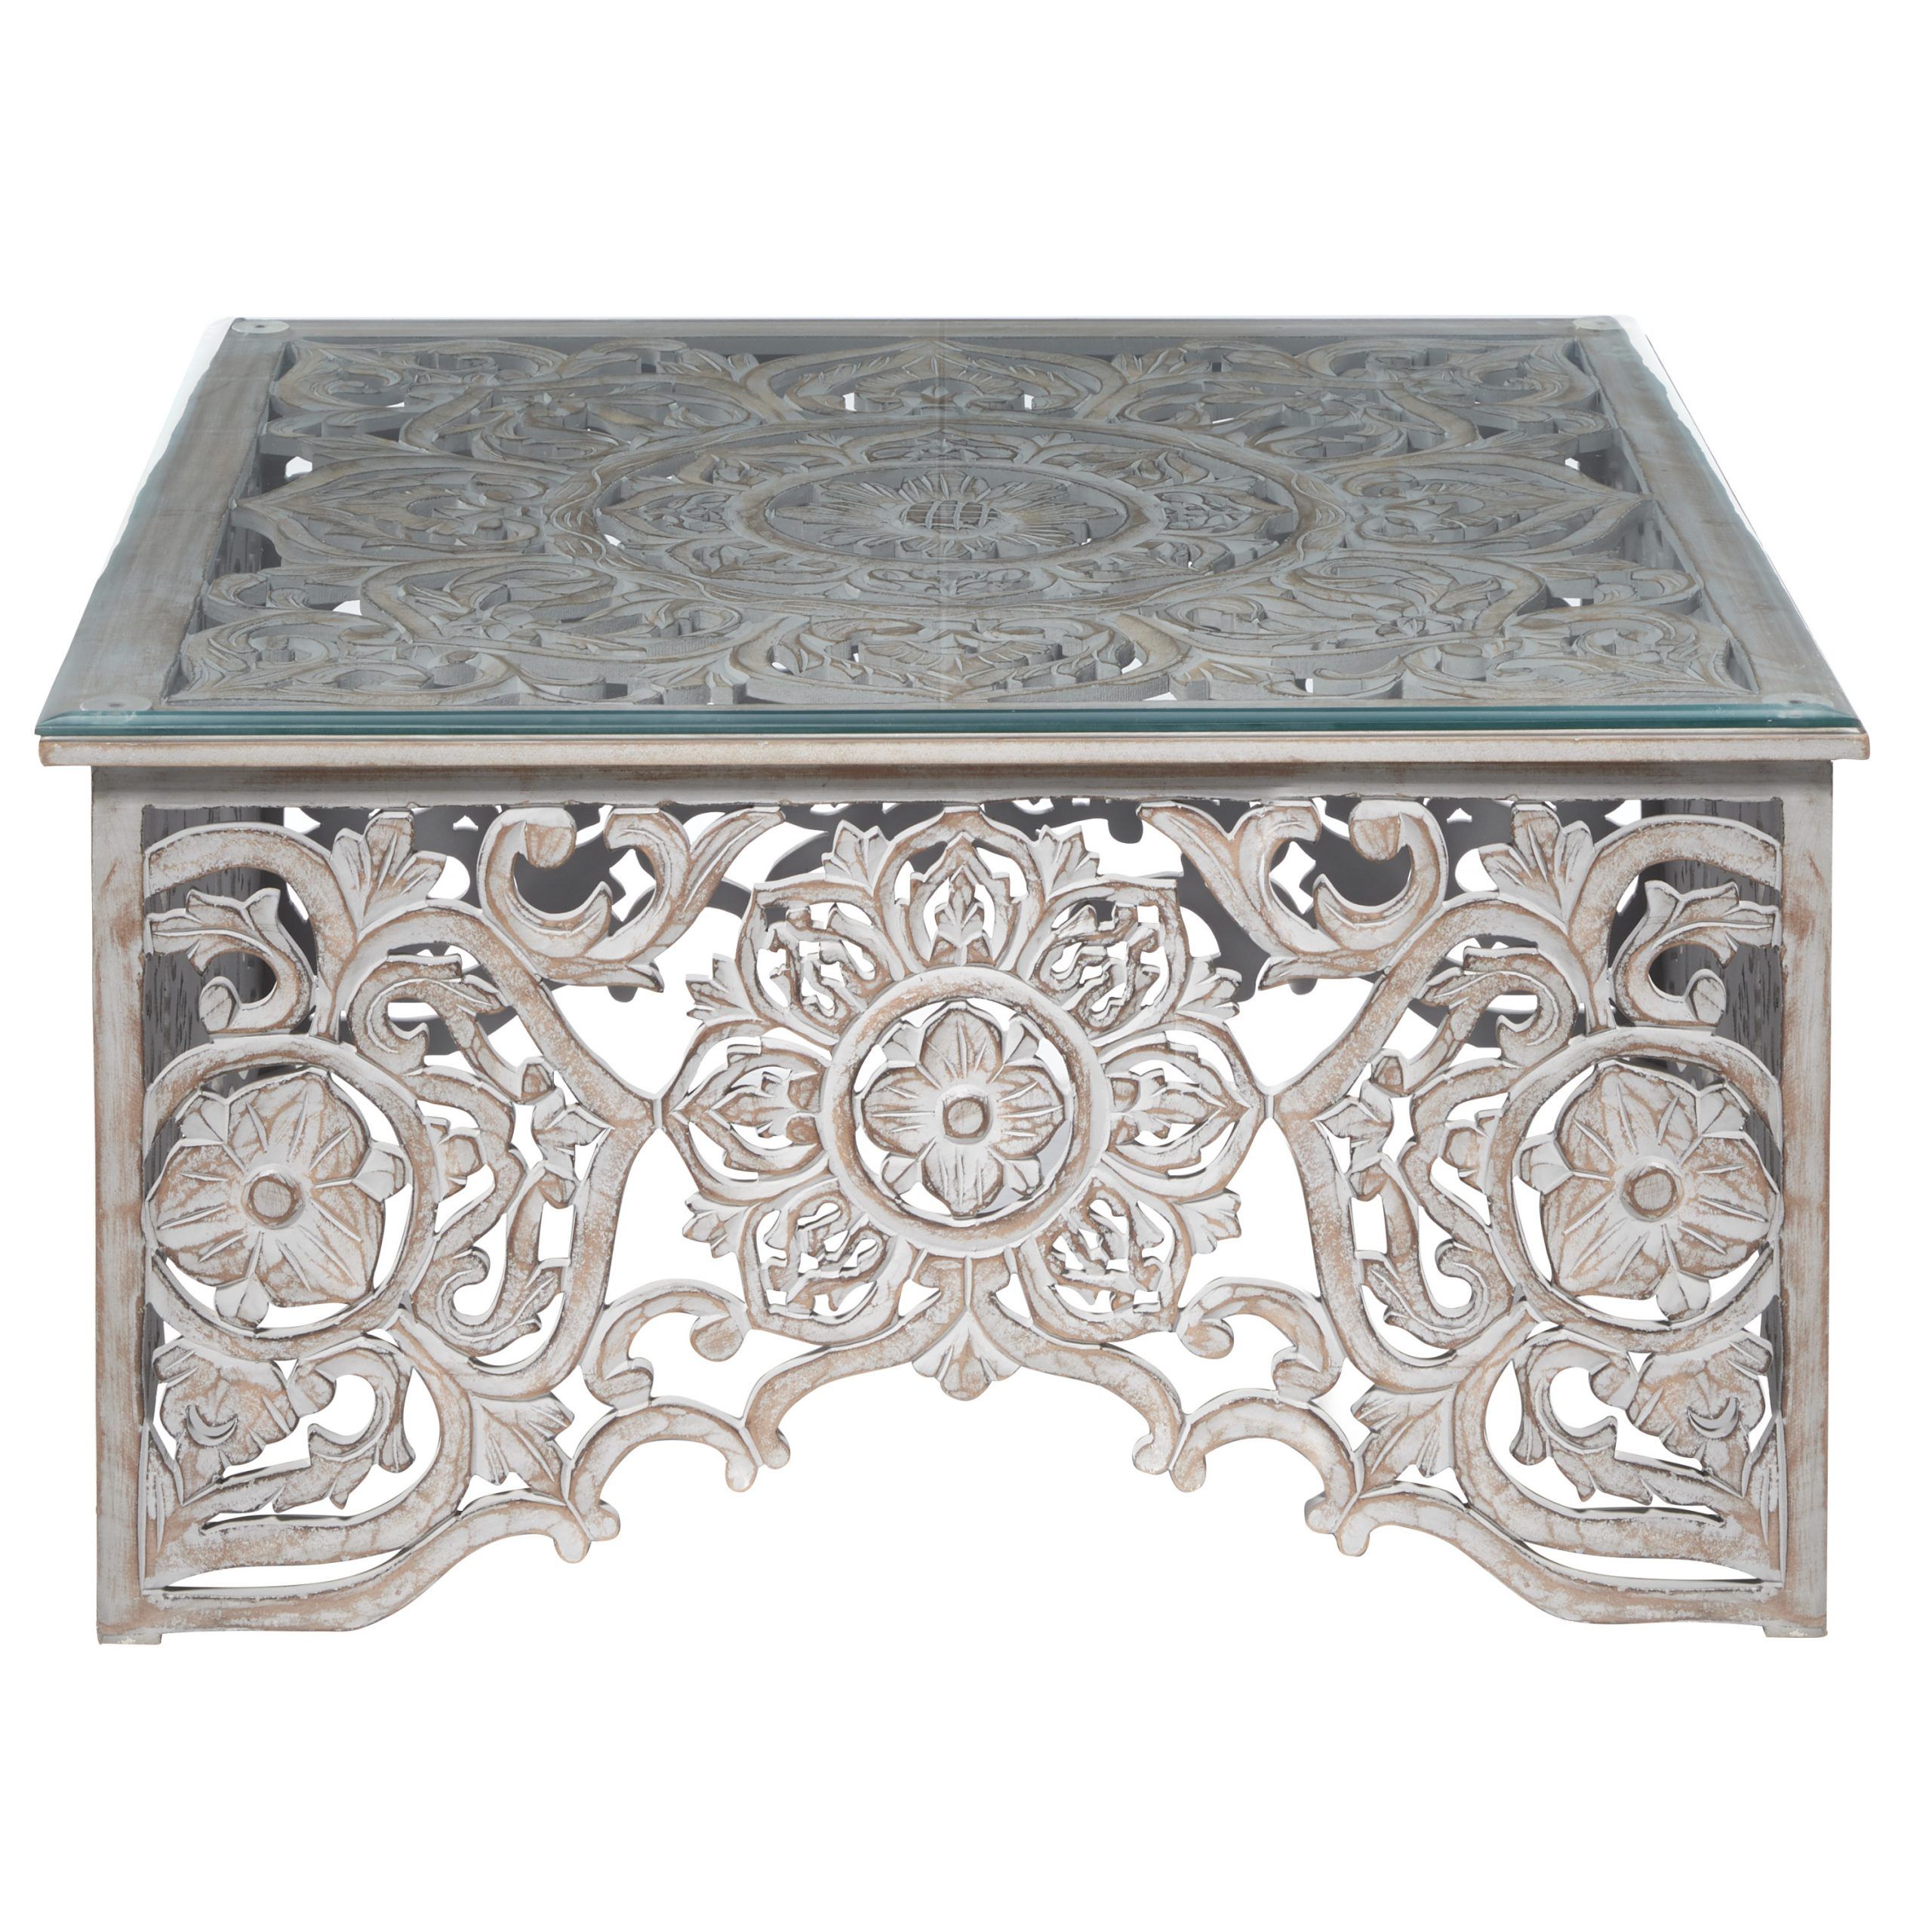 Decmode 22340 Square Distressed White Wood Carved Coffee Table With For Distressed Brown Wood 2 Tier Desks (View 7 of 15)